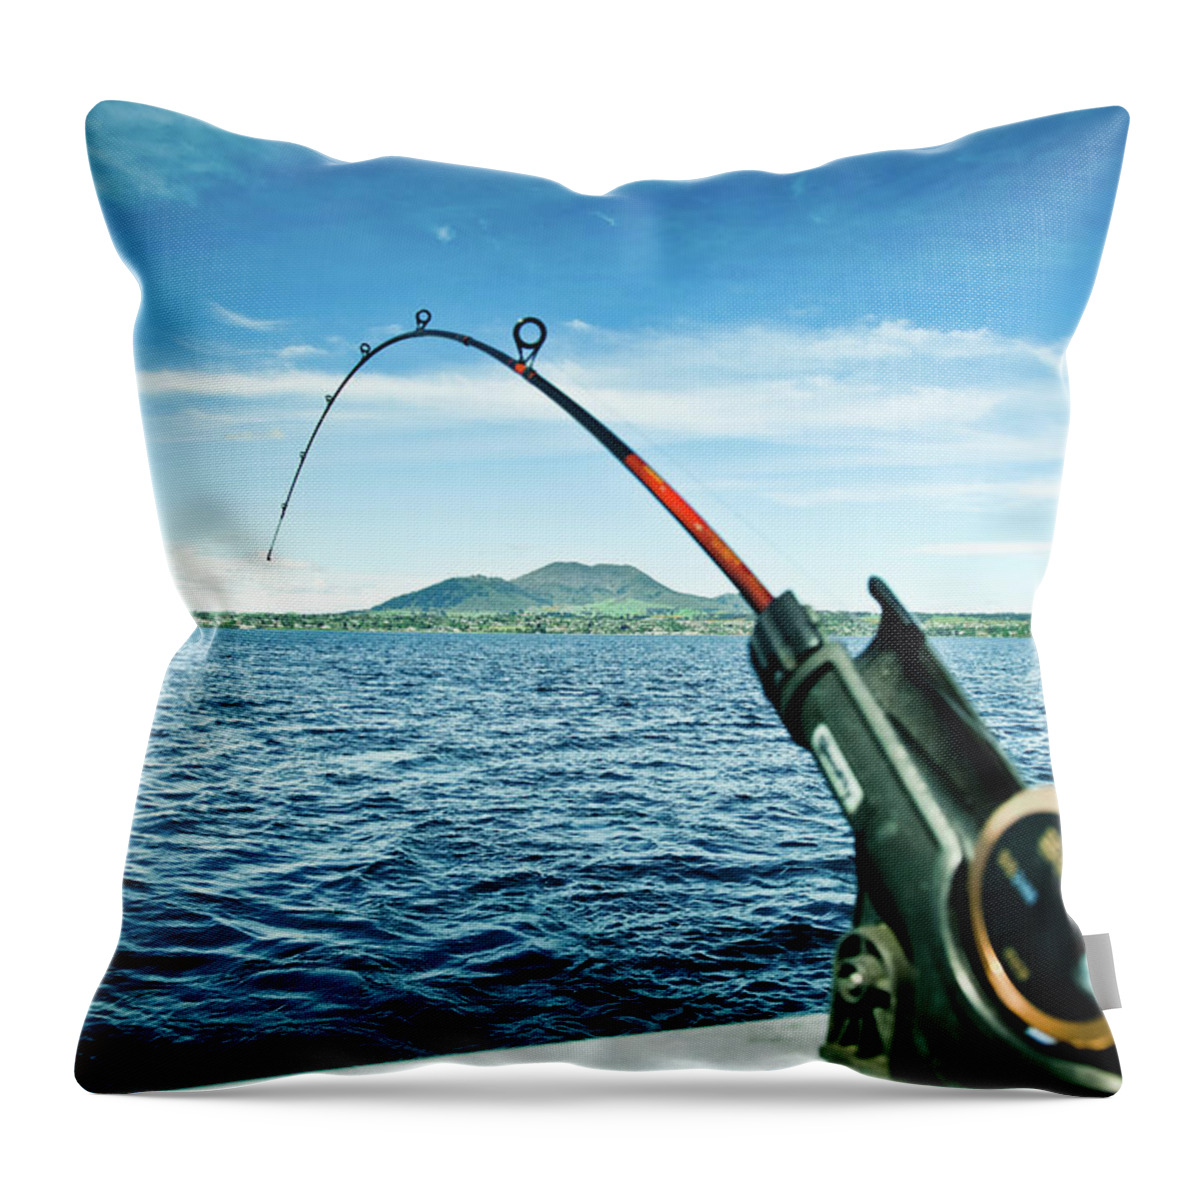 Tranquility Throw Pillow featuring the photograph Fishing by Walter wang